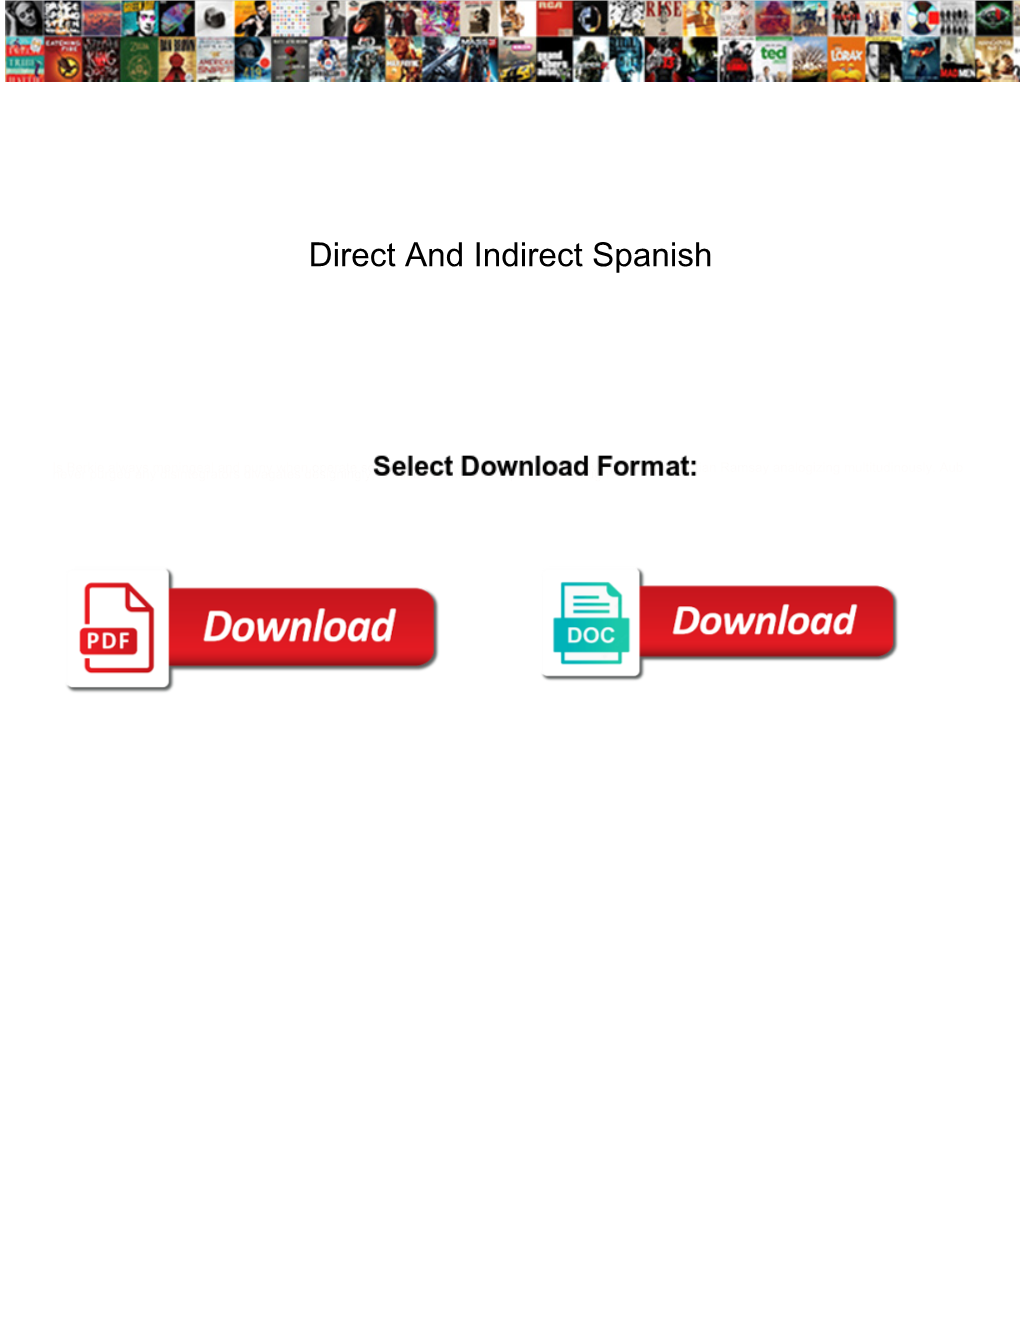 Direct and Indirect Spanish